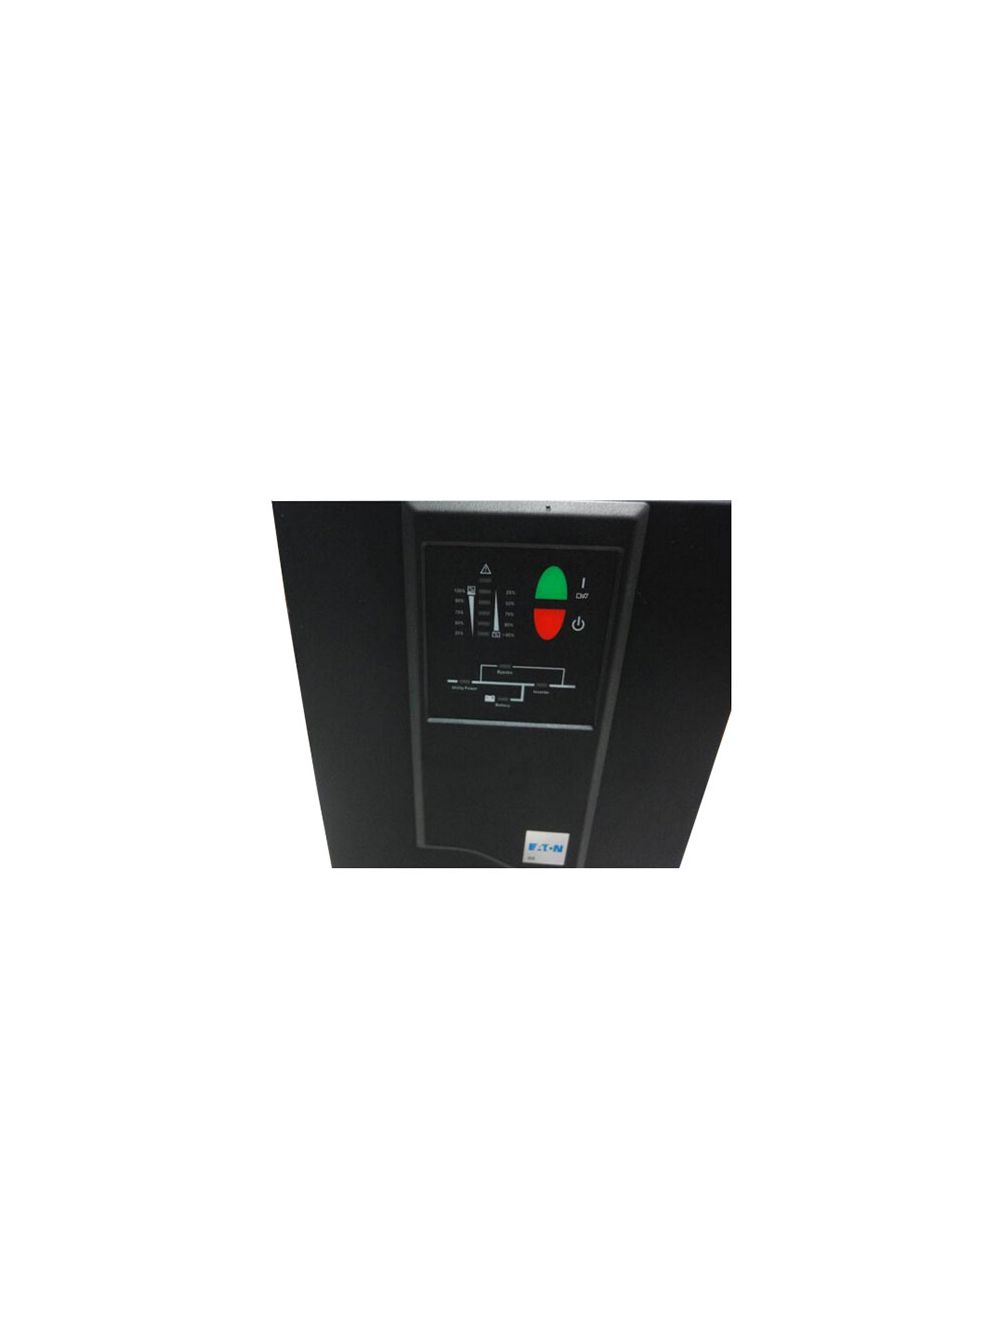 New In stock for sale, Eaton MGE UPS Power Supply EDX3000C